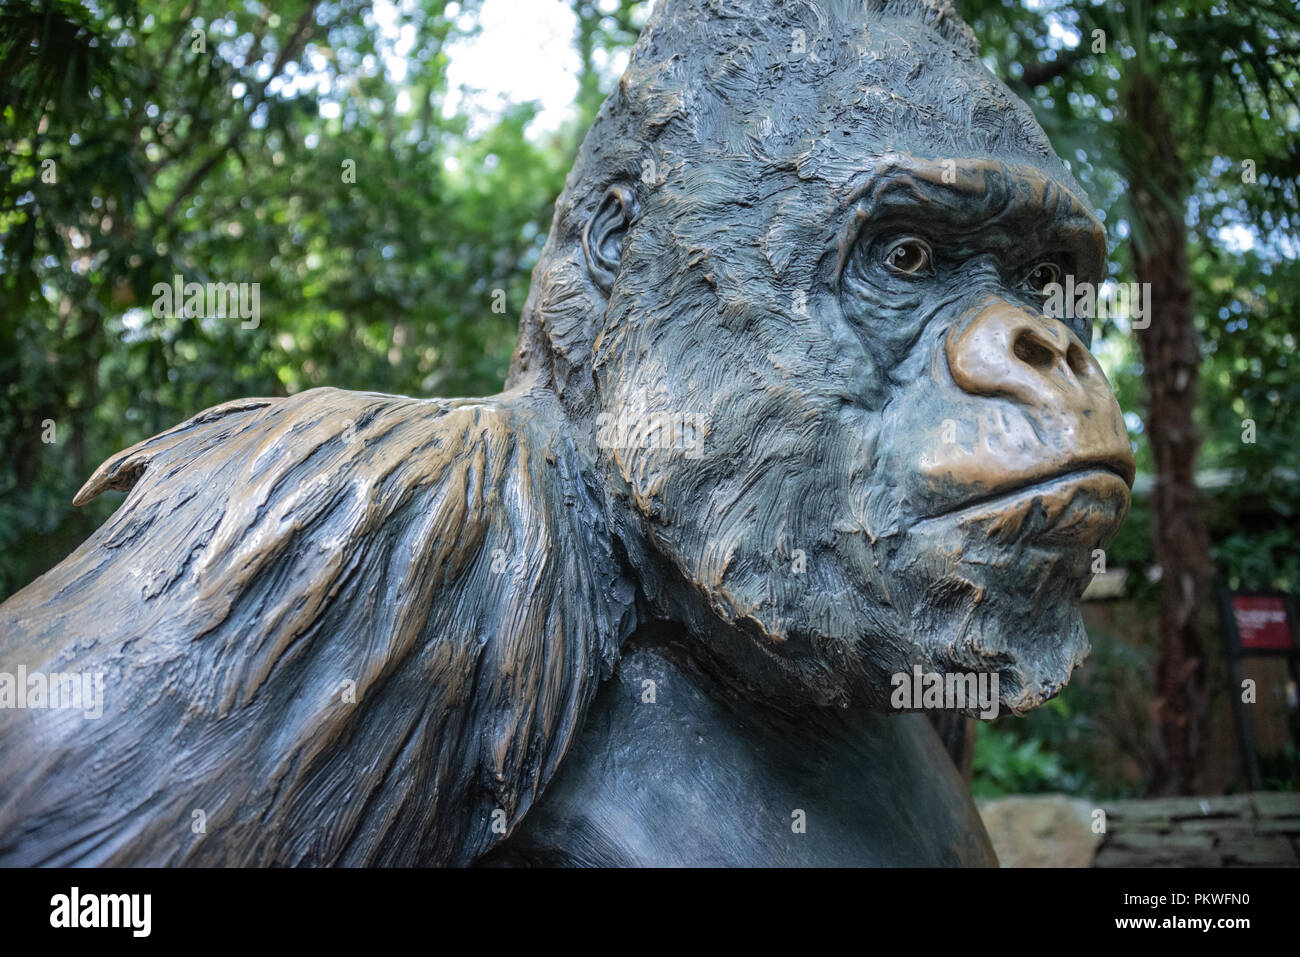 Bronze statue of Willie B., a popular western lowland gorilla at Zoo Atlanta who was named after former mayor of Atlanta, William Berry Hartsfield. Stock Photo